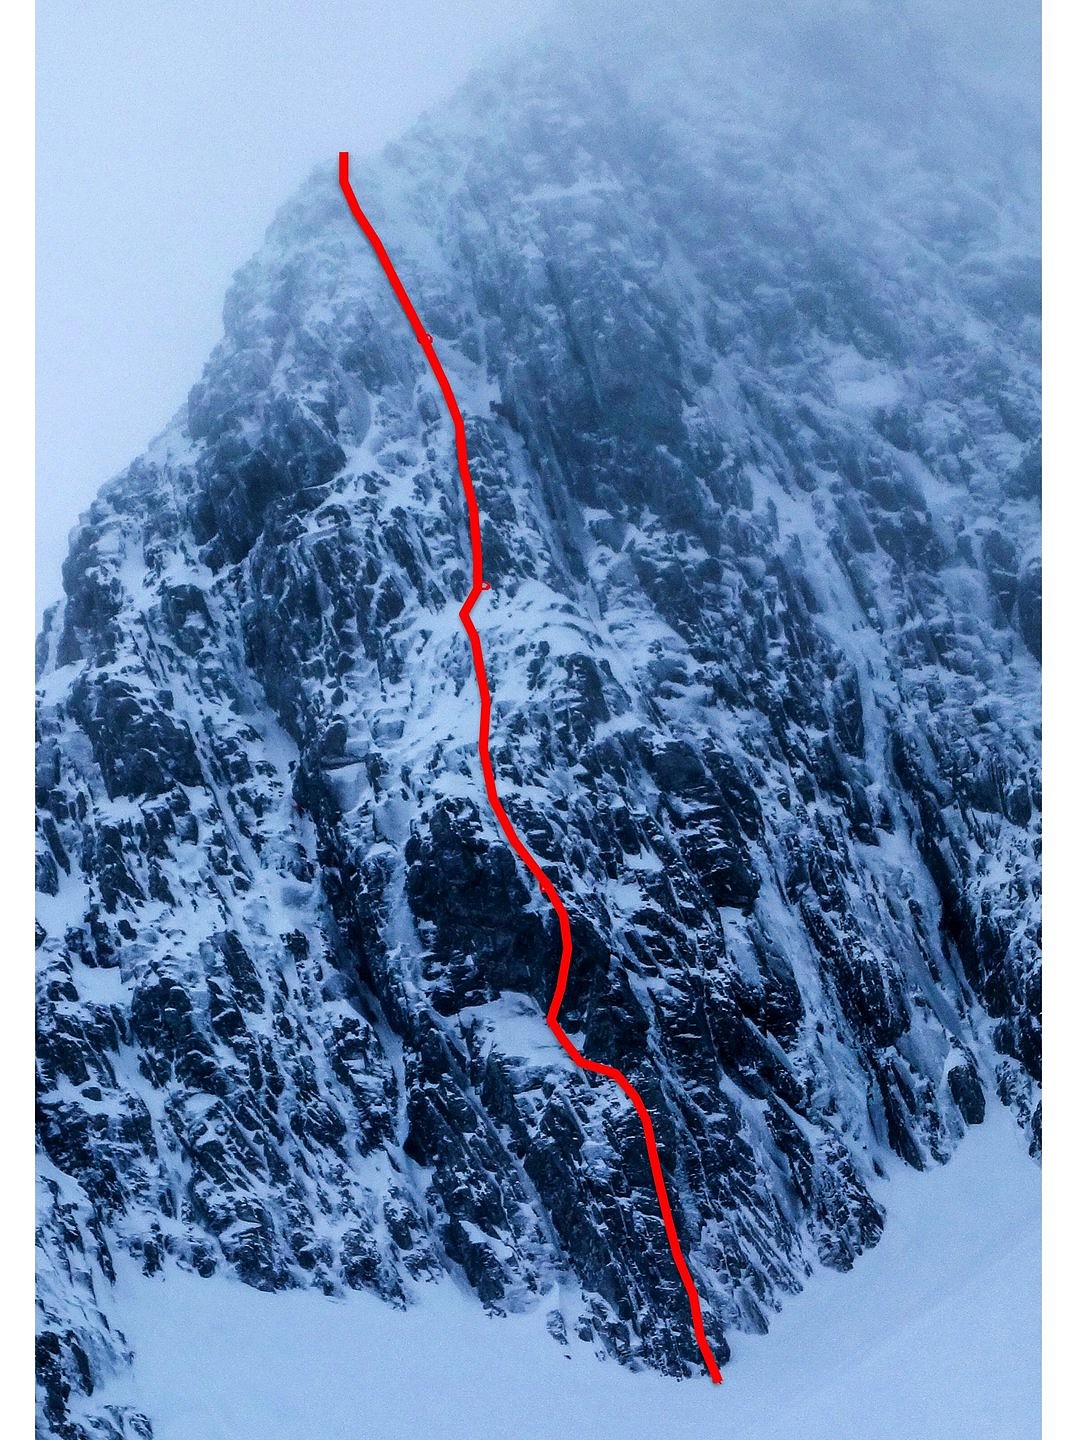 The line of the new route Calculus (VIII,8) on Minus Two Buttress.  © Andy Inglis